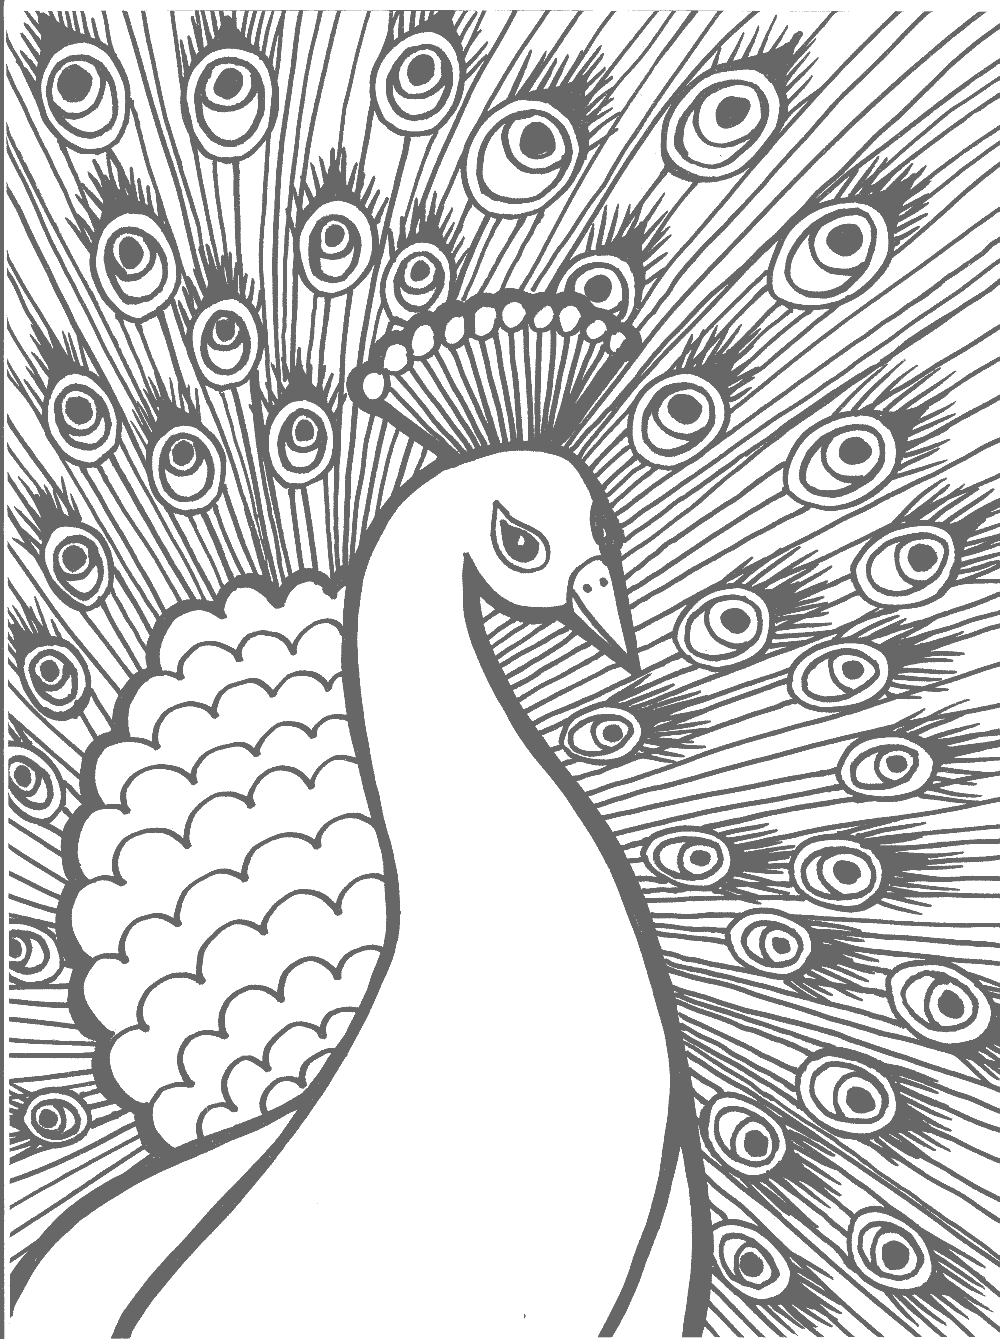 Grayed Peacock Page for Coloring